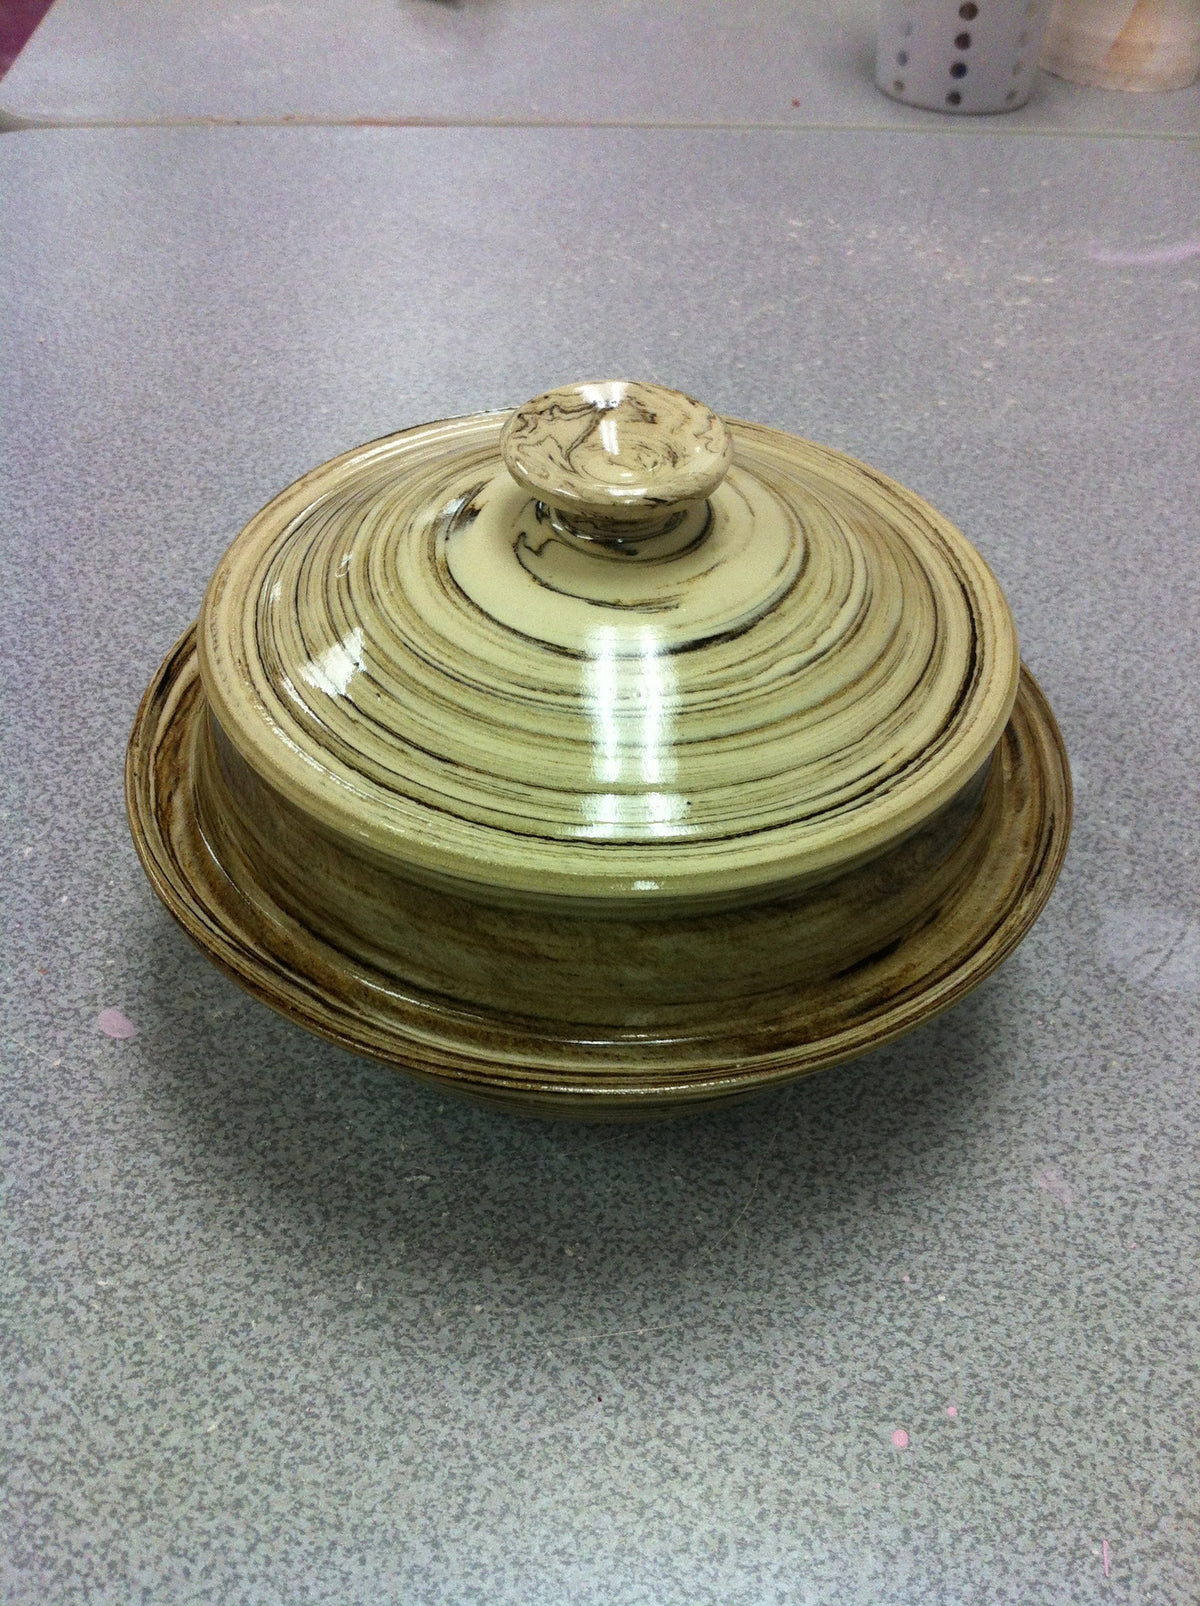 Lidded jar with marbling effect.